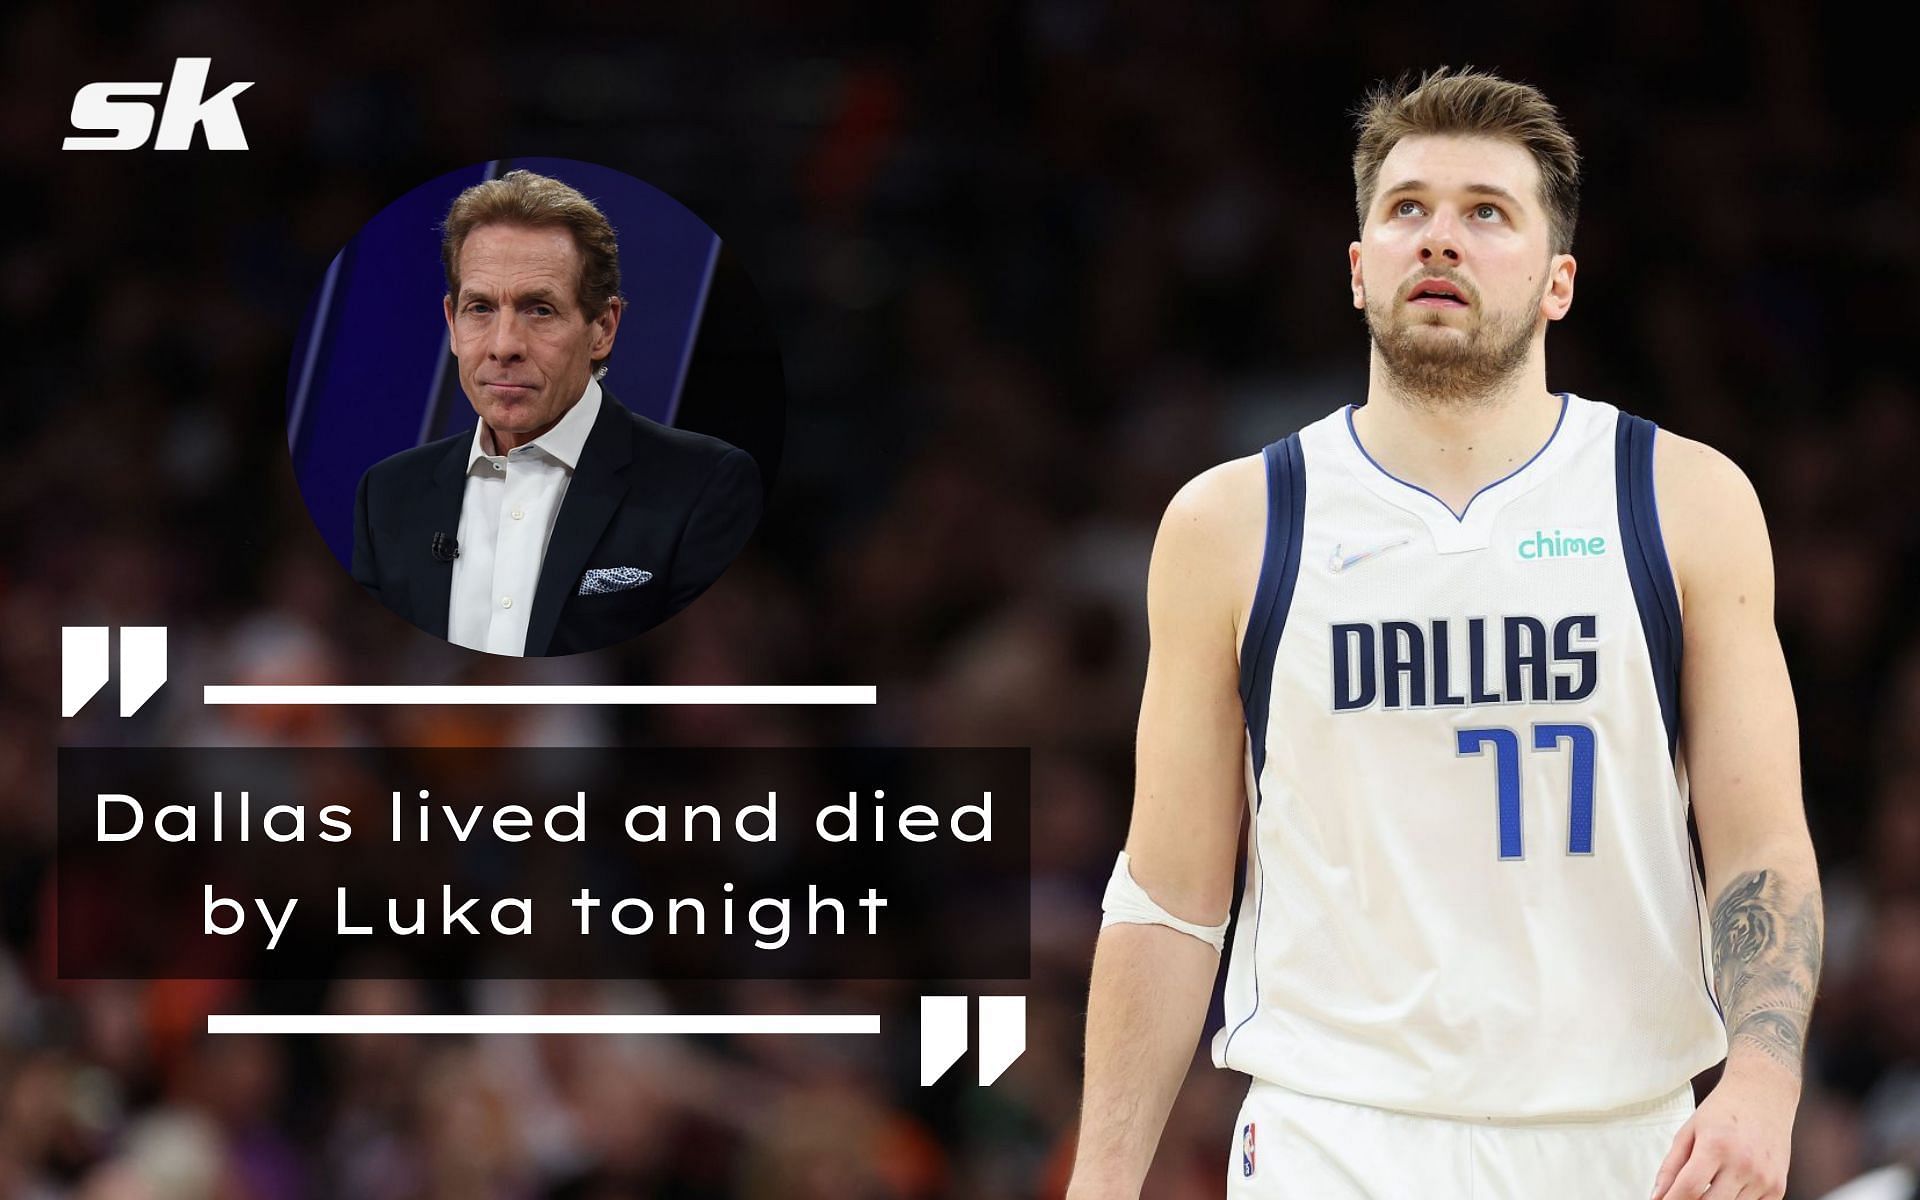 Skip Bayless had comments on Luka Doncic after the Mavericks&#039; loss against the Warriors